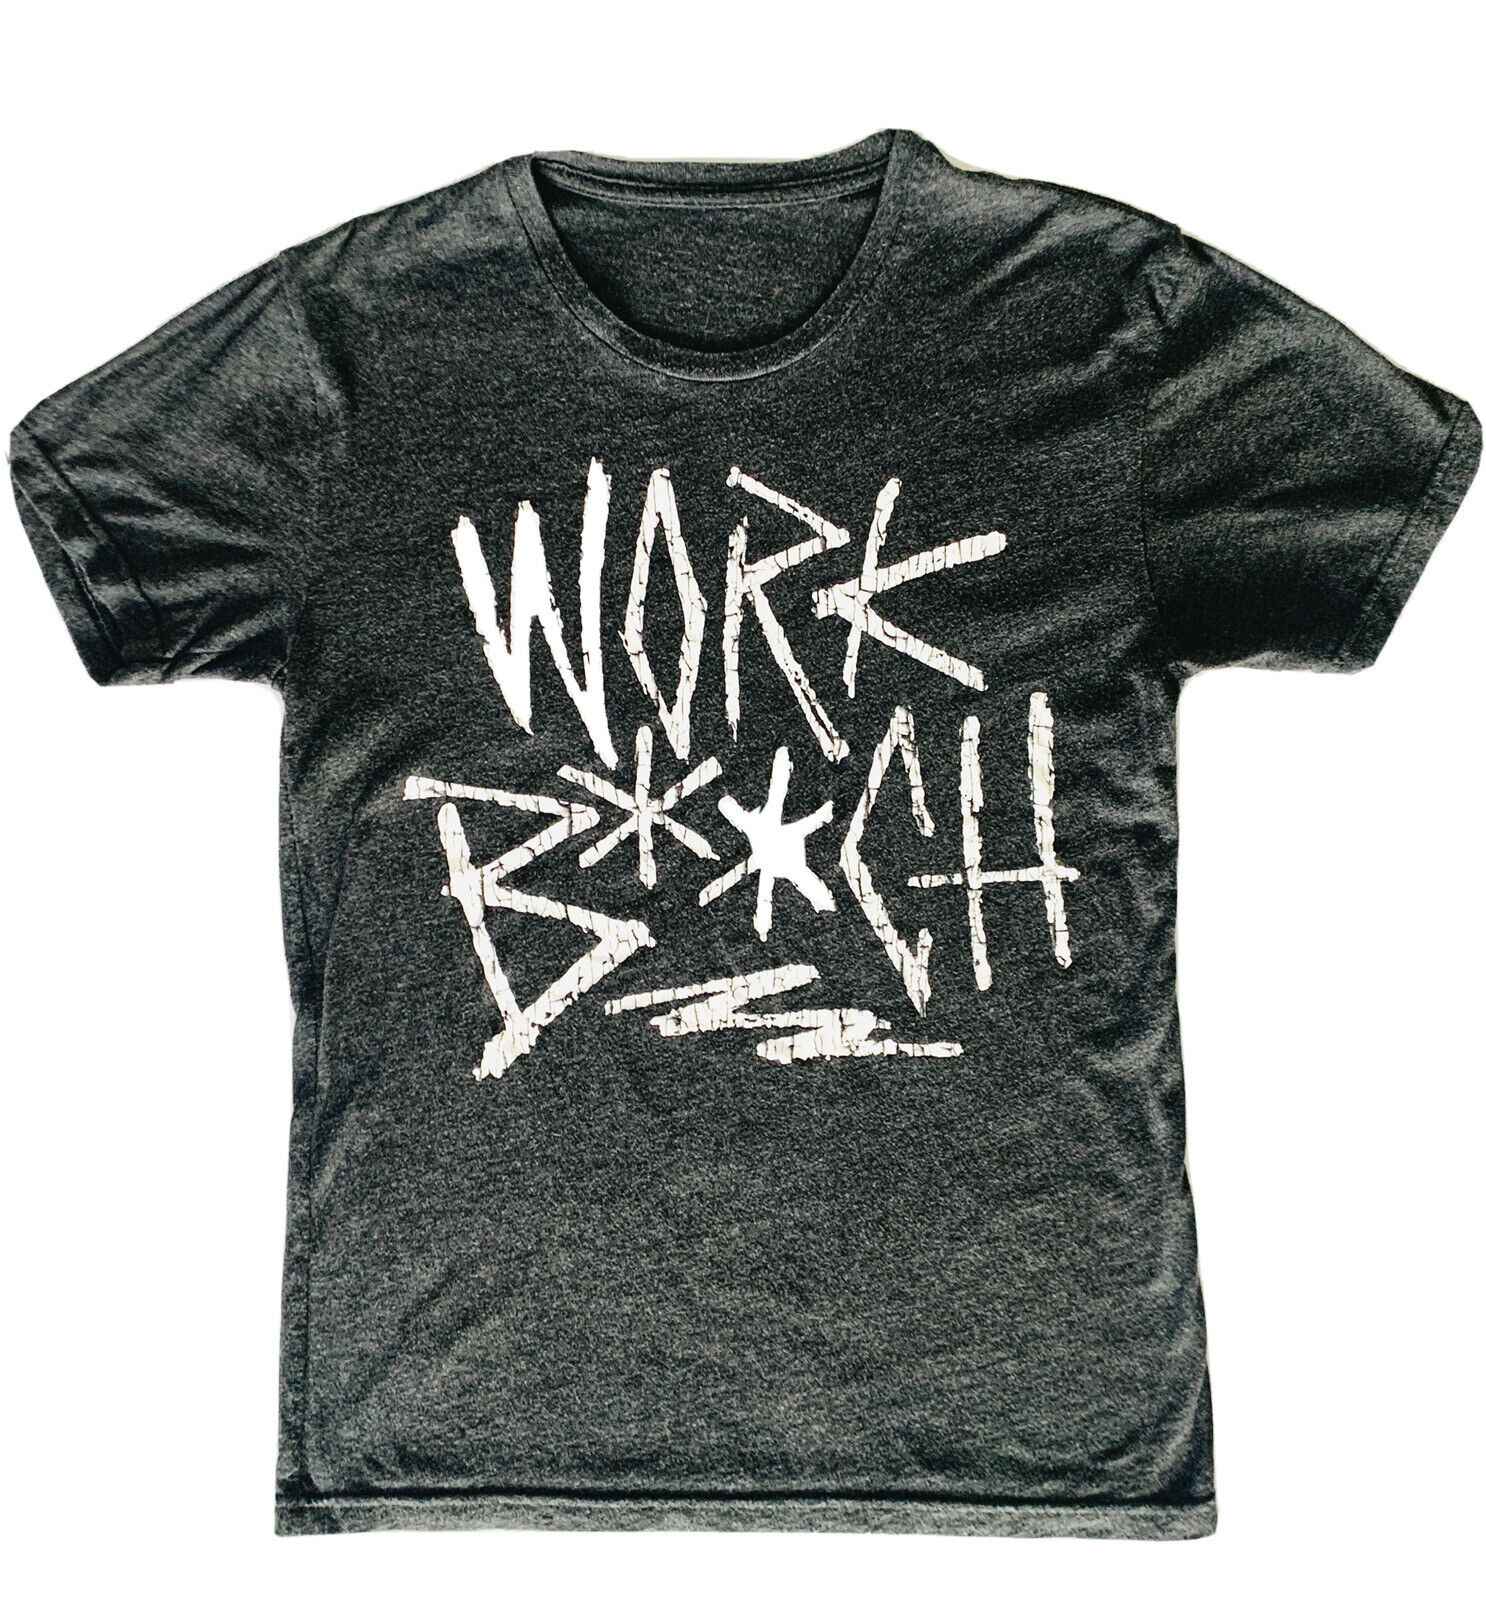 BRITNEY SPEARS Work Bitch T-Shirt Adult Large Gray Short Sleeve Piece Of Me Show